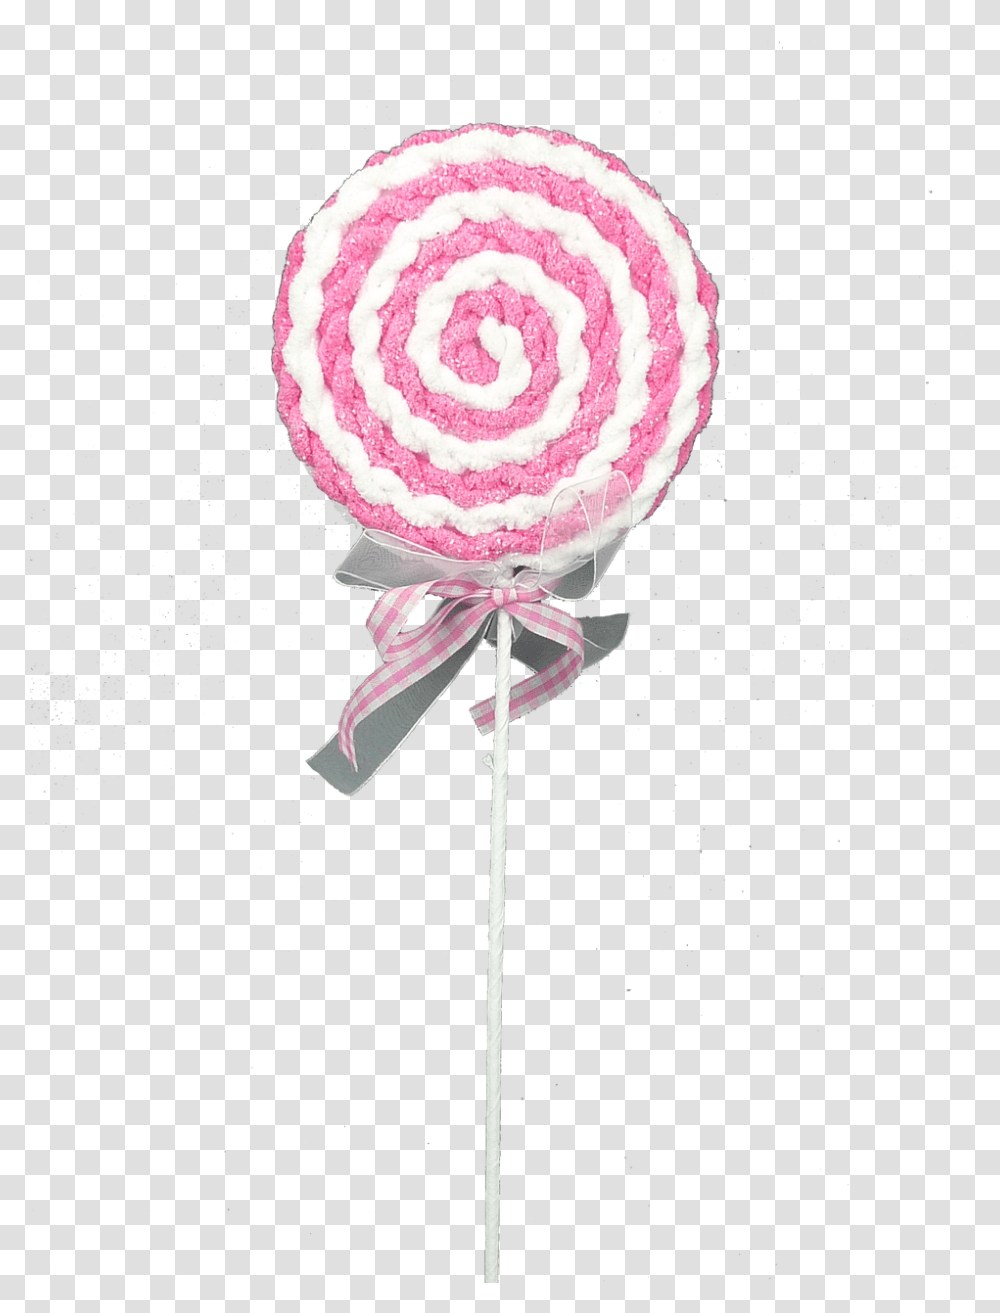 The Avengers, Lollipop, Candy, Food Transparent Png